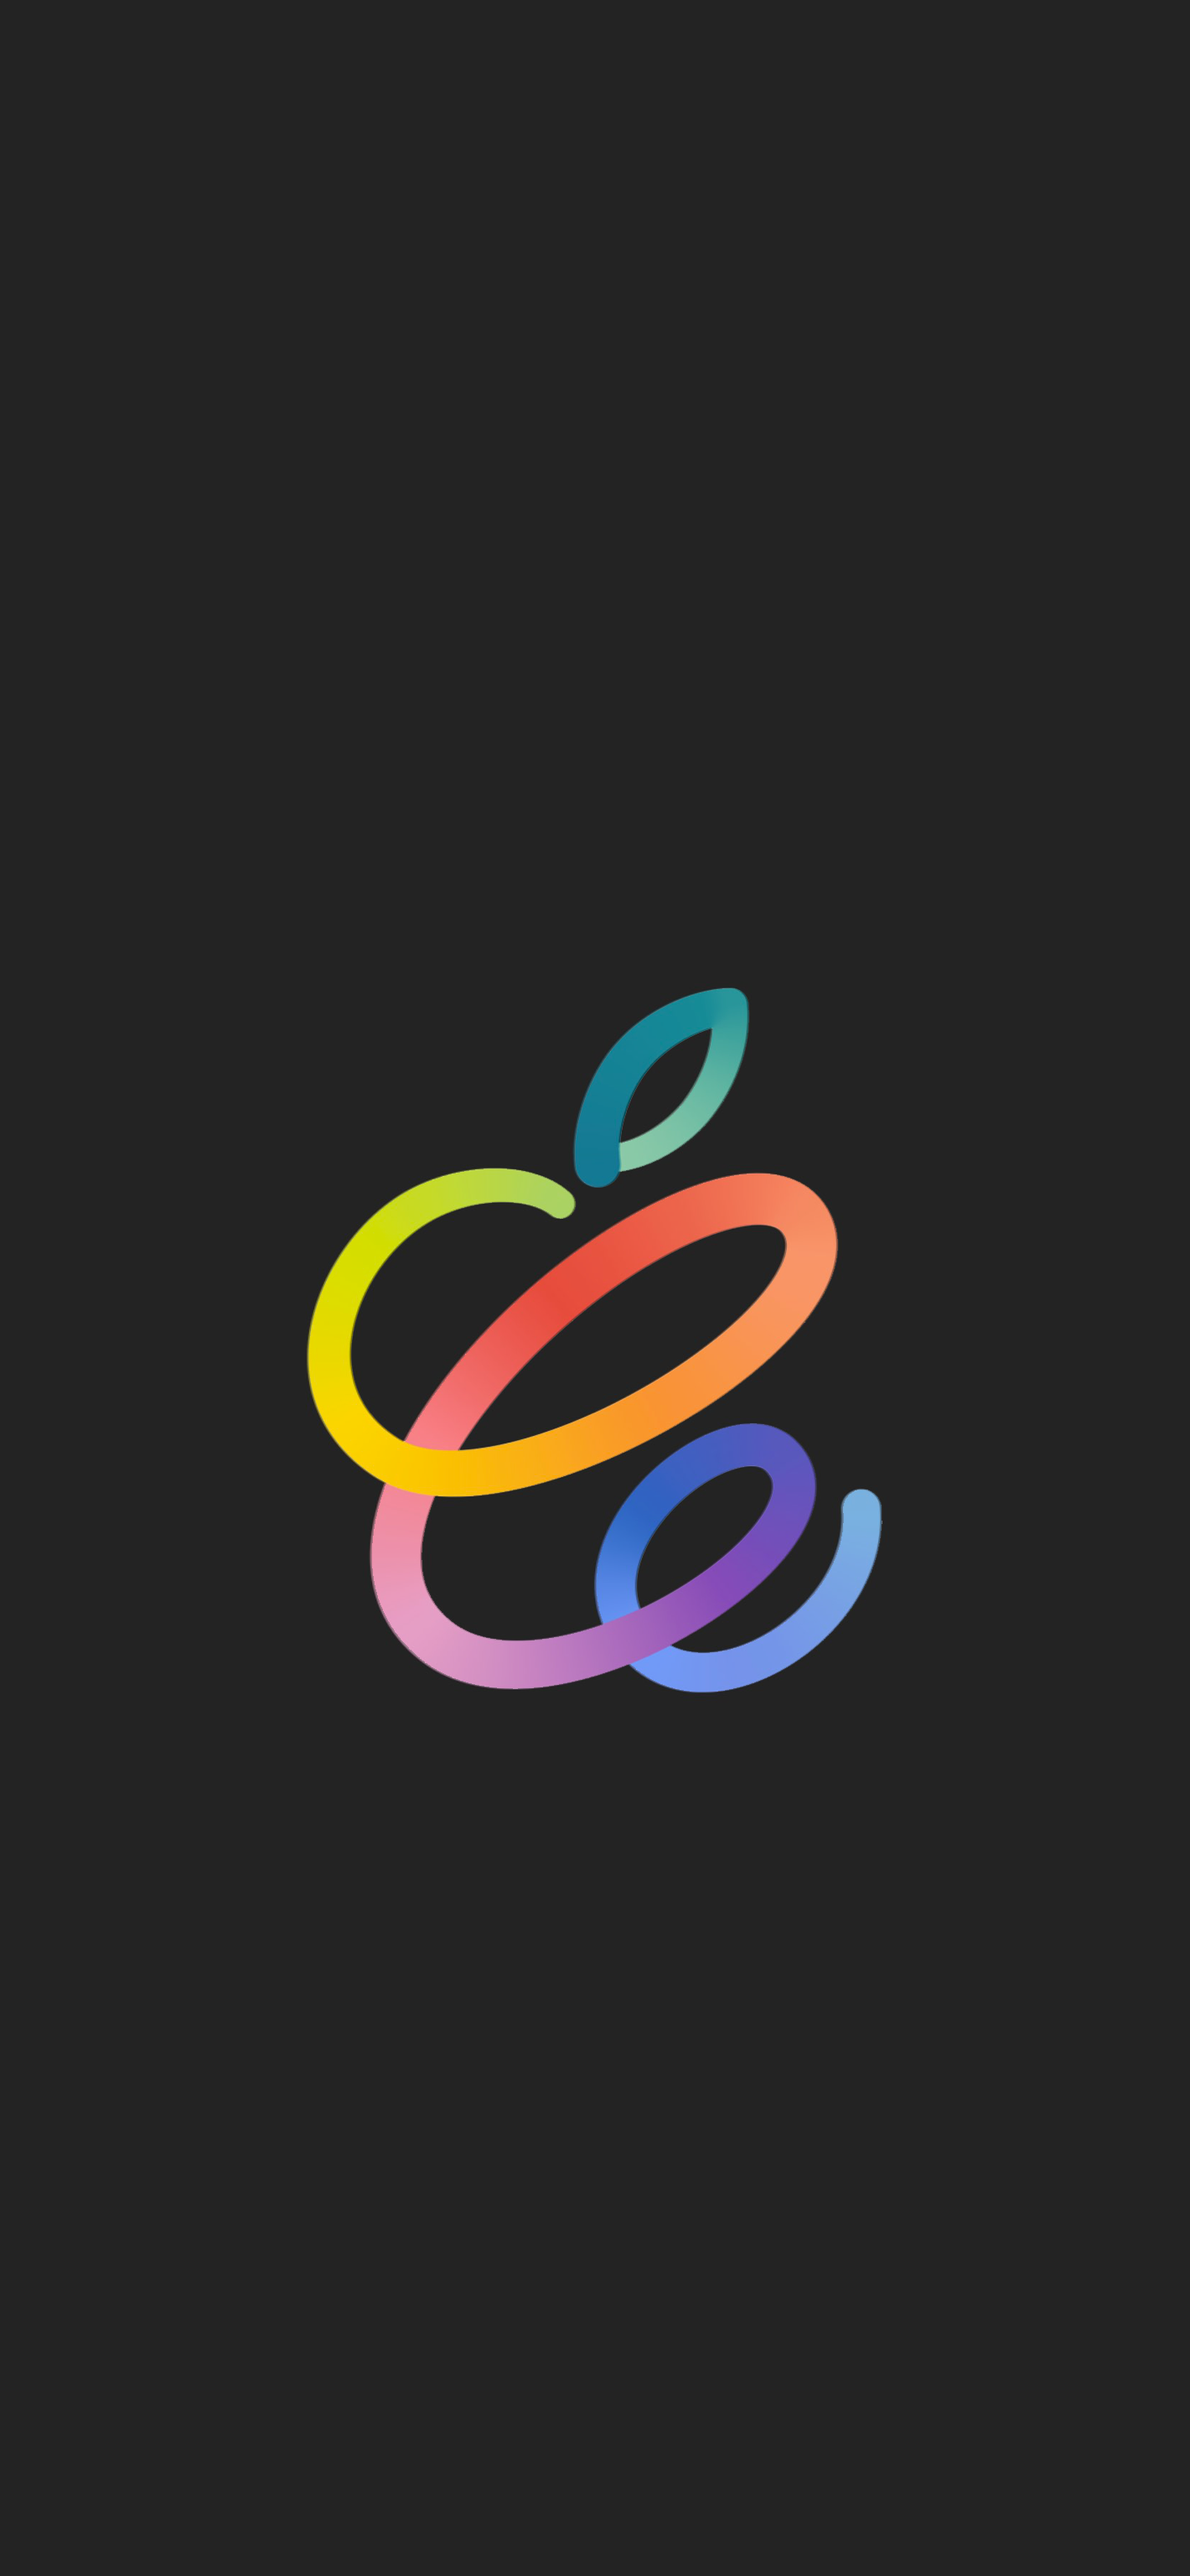 aws𝕏 on Twitter new apple event wallpaper AppleEvent Wallpapers  download  httpstcozh9Z1smrTO httpstcoPvmeEI5I7r  X